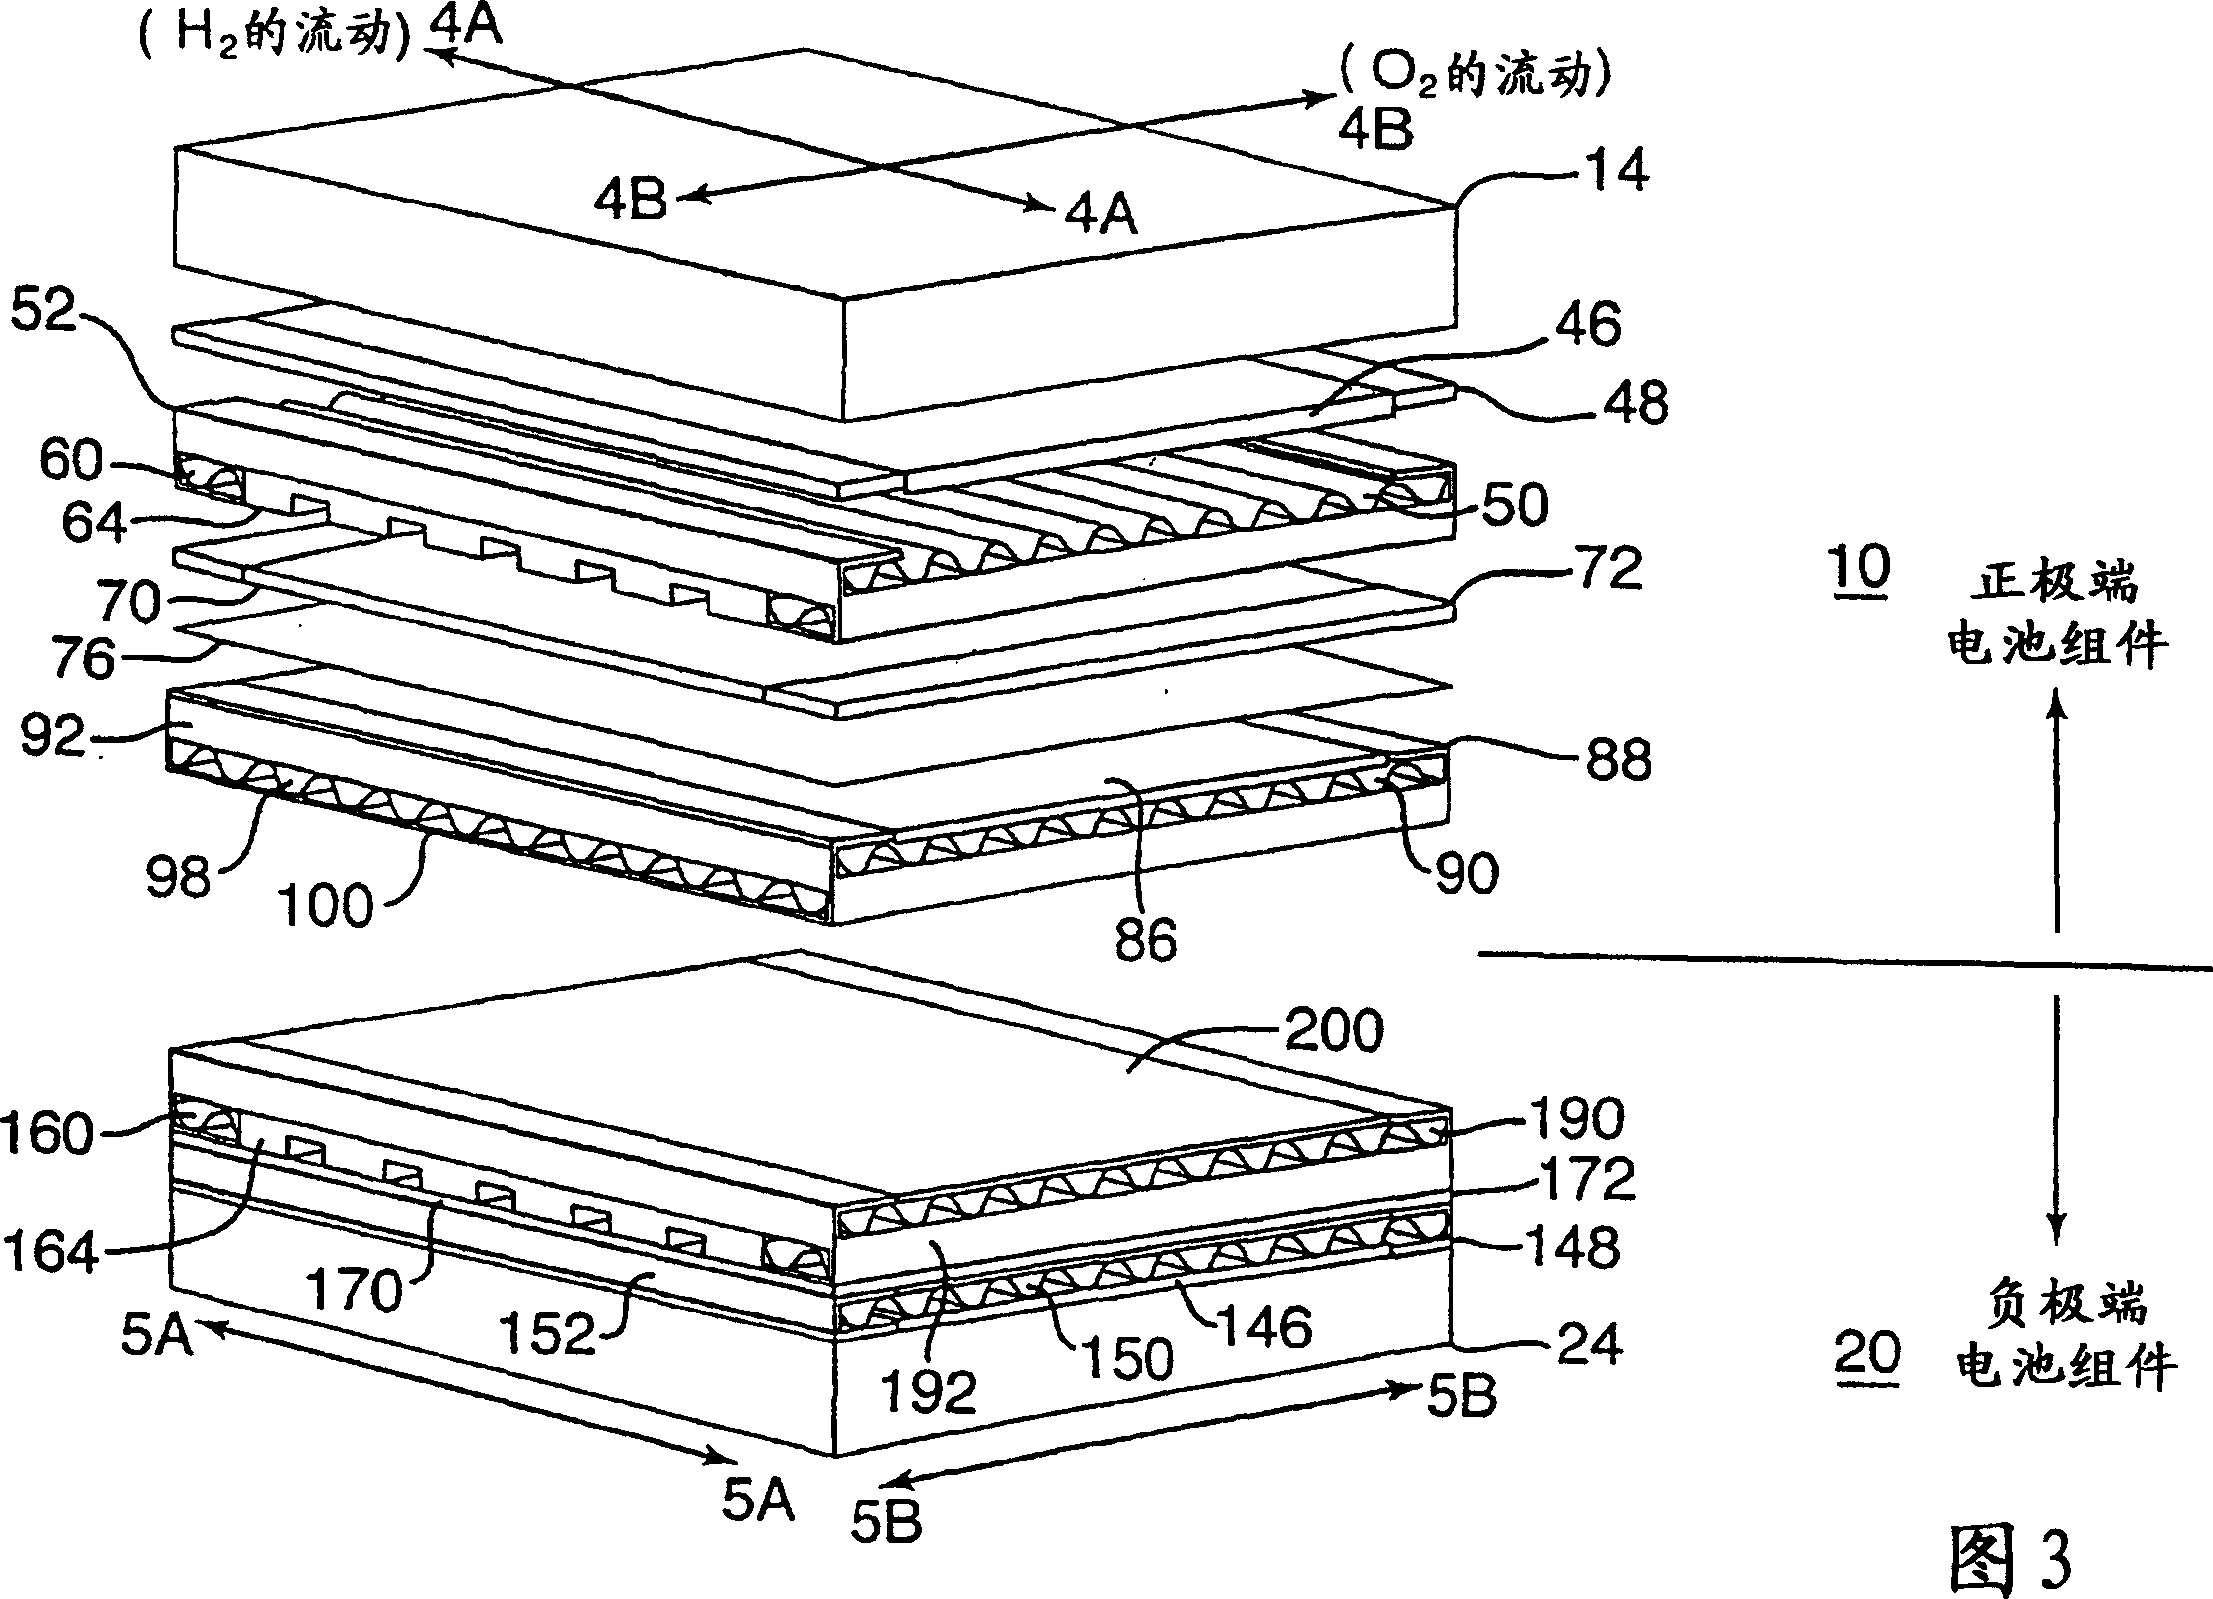 Inactive end cell assembly for fuel cells for improved electrolyte management and electrical contact